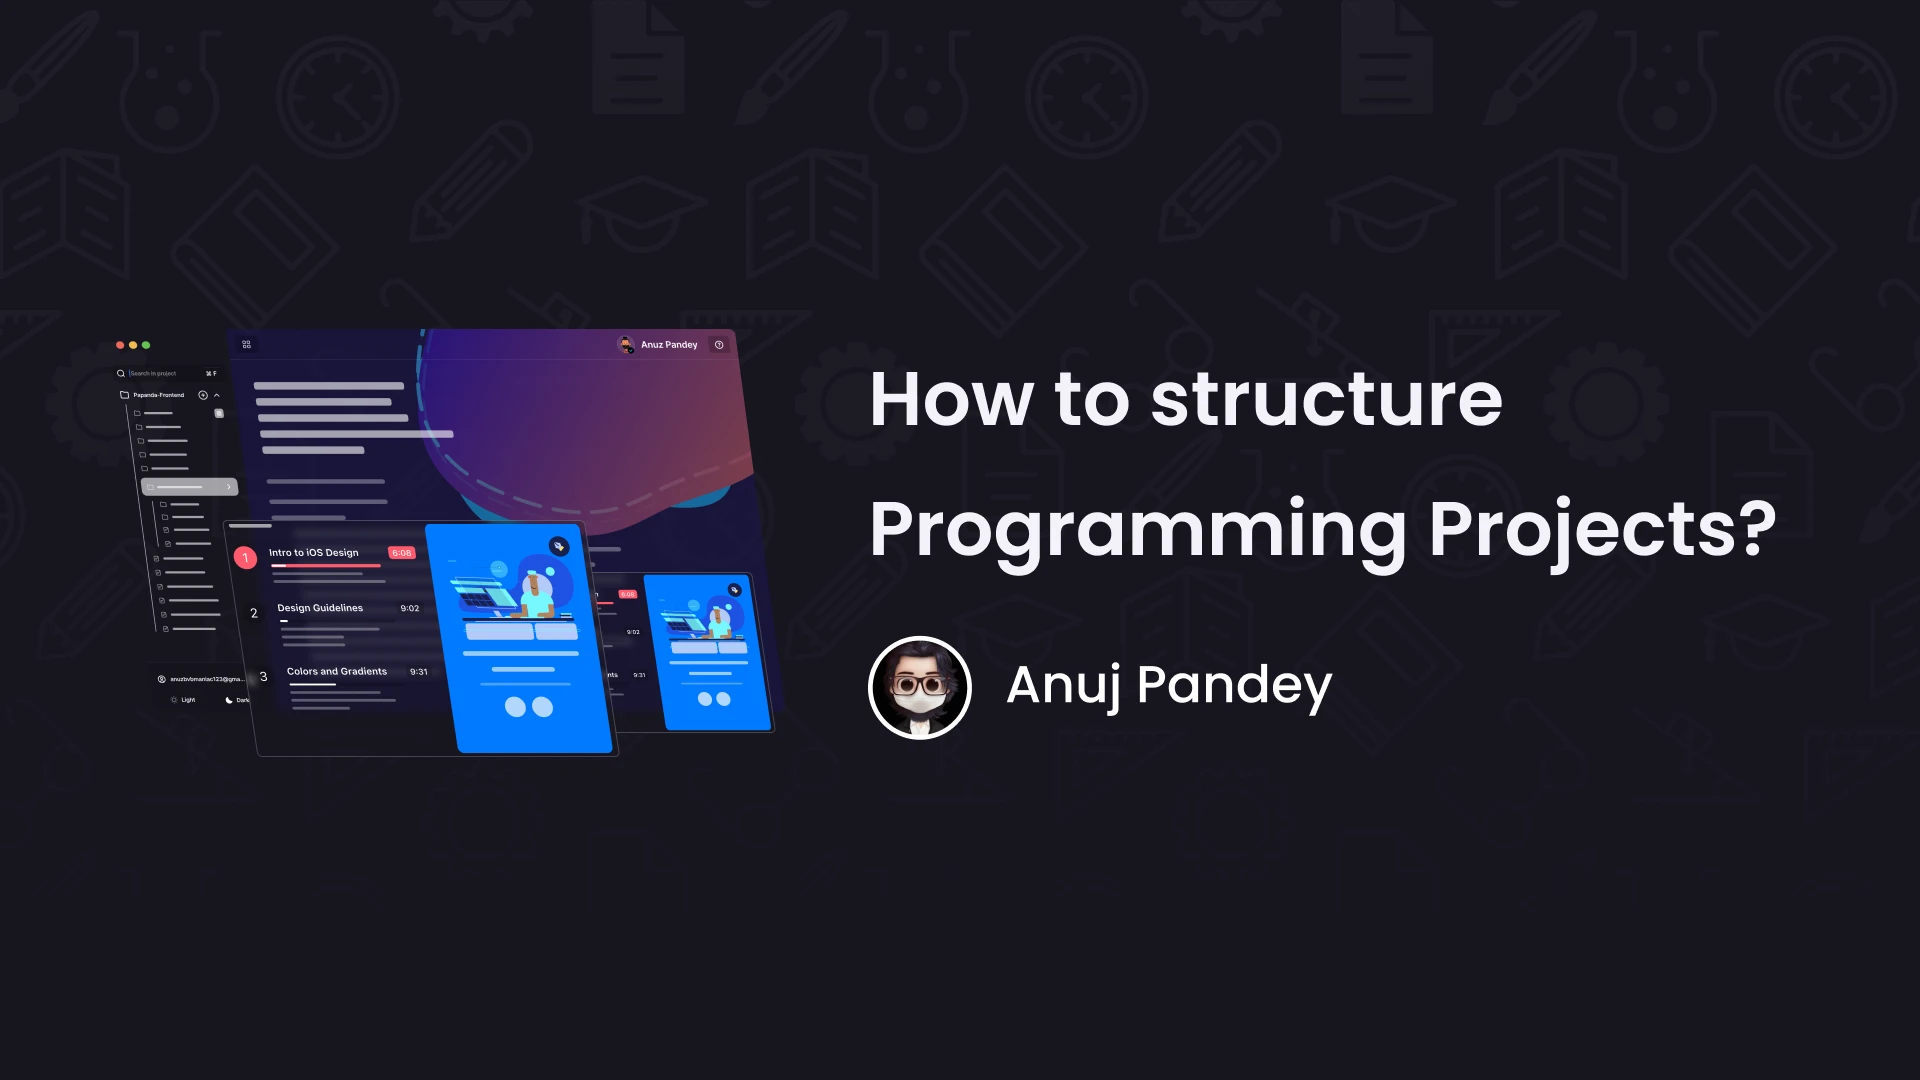 How to structure Programming Projects?